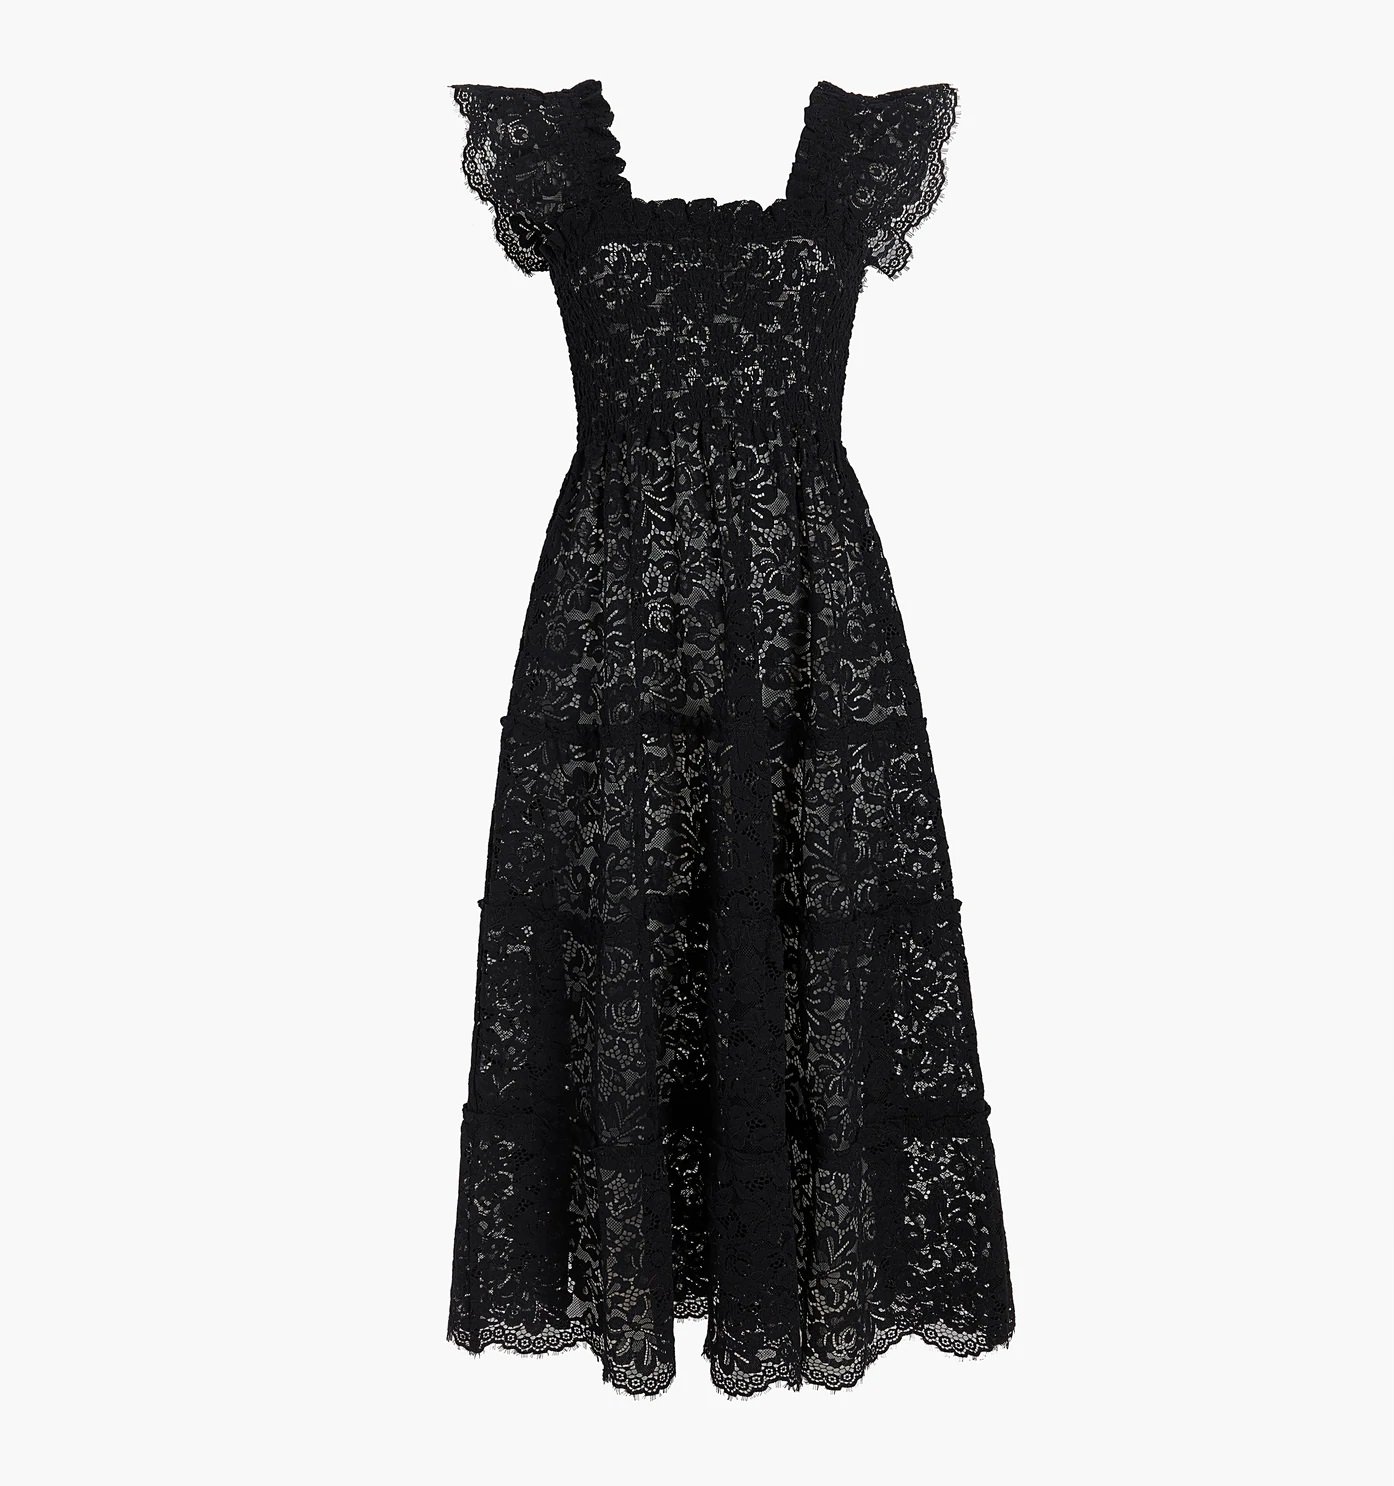 Hill House The Collector's Edition Ellie Nap Dress in Black Lace.jpg